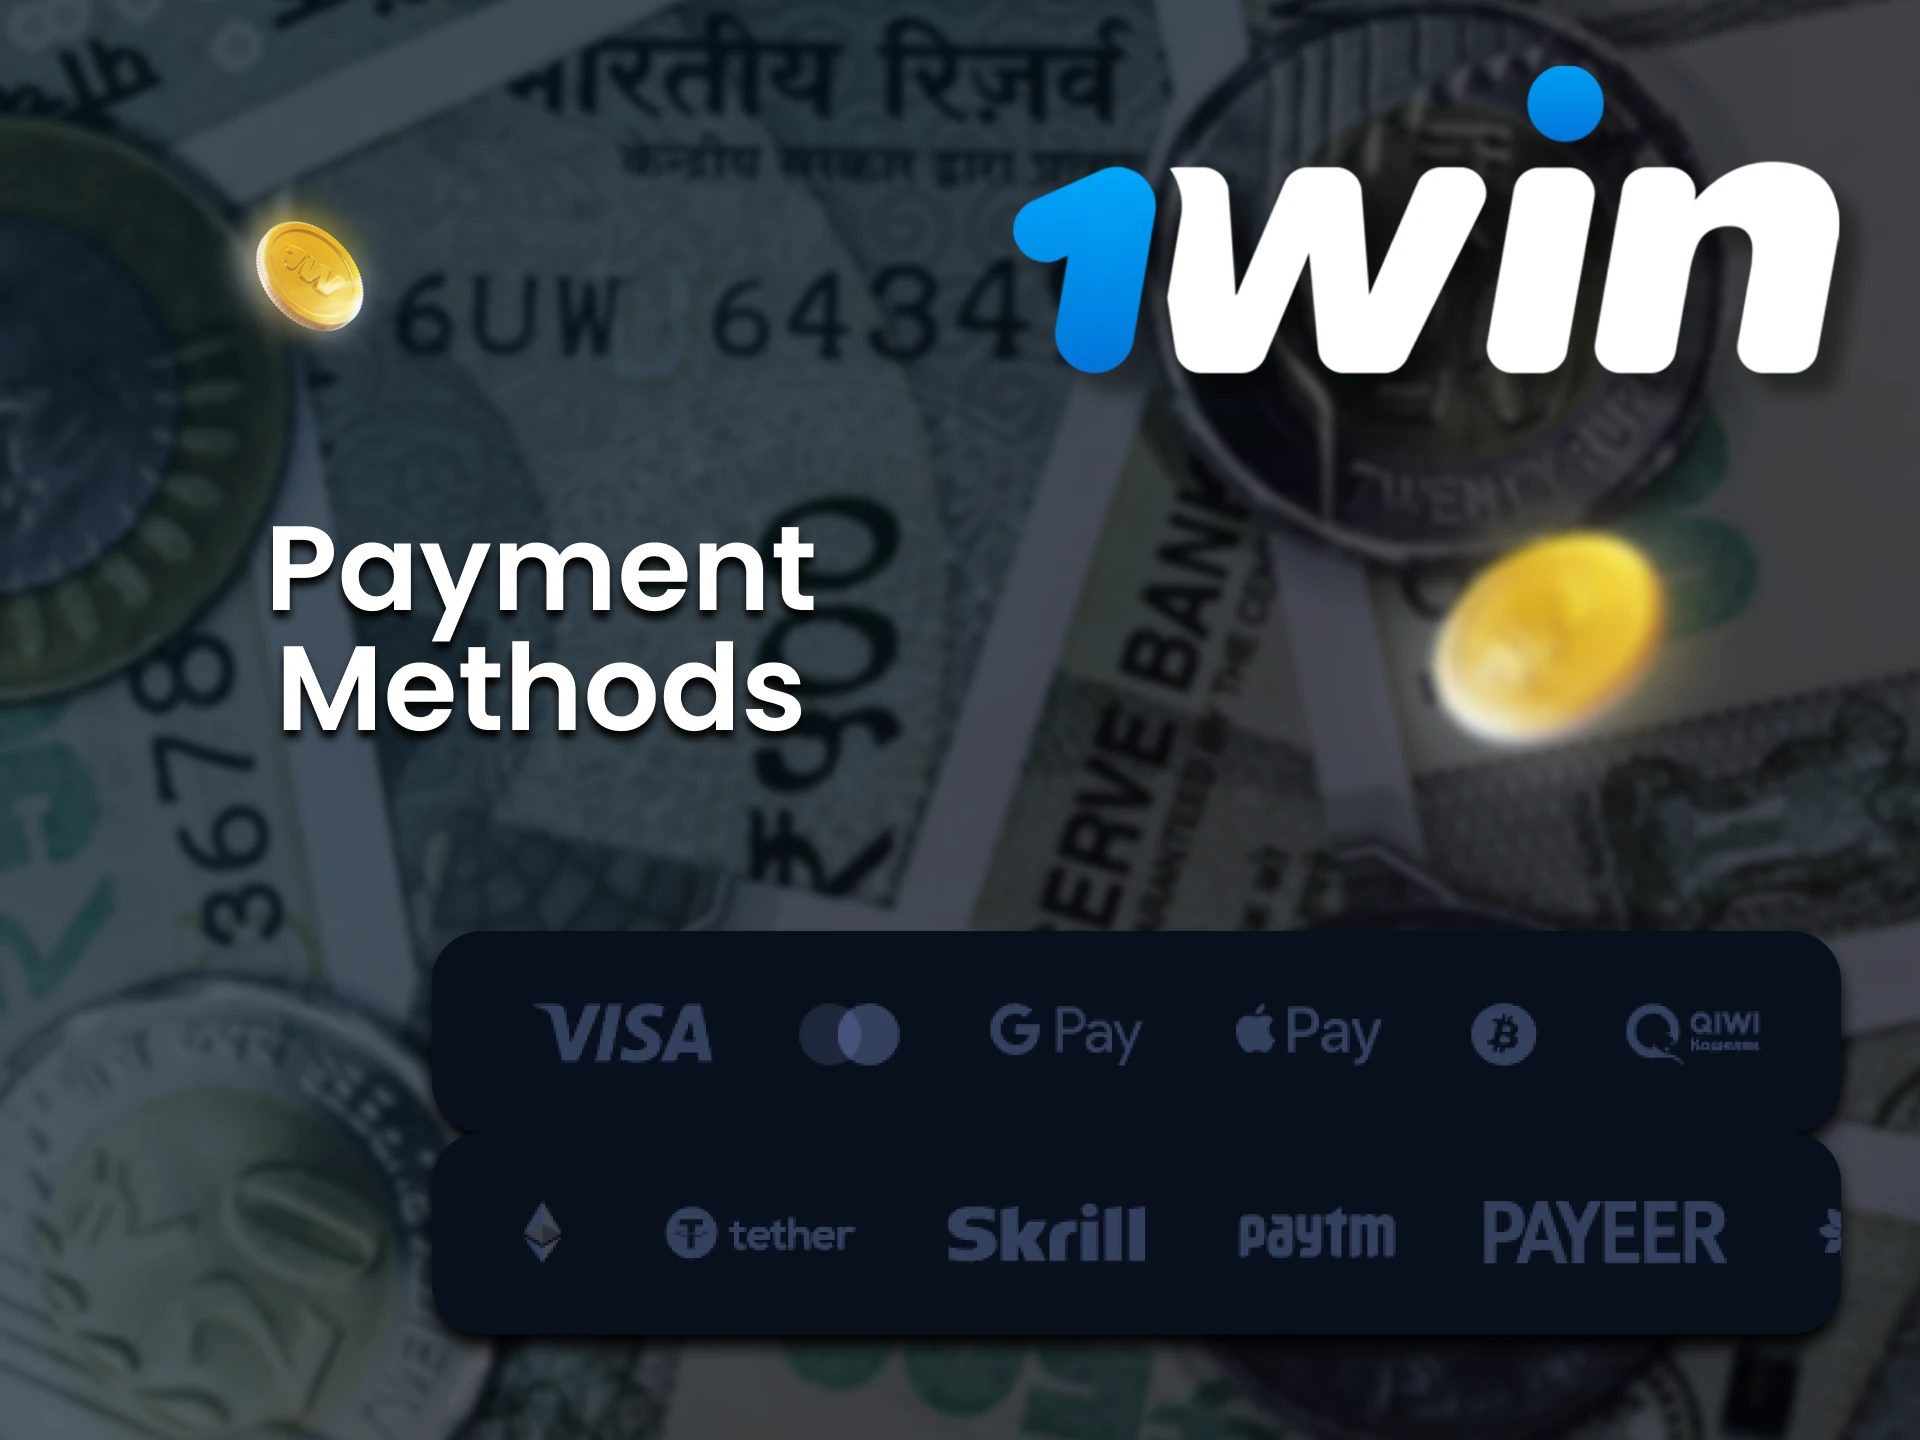 Find out the payment methods in the 1win affiliate program.